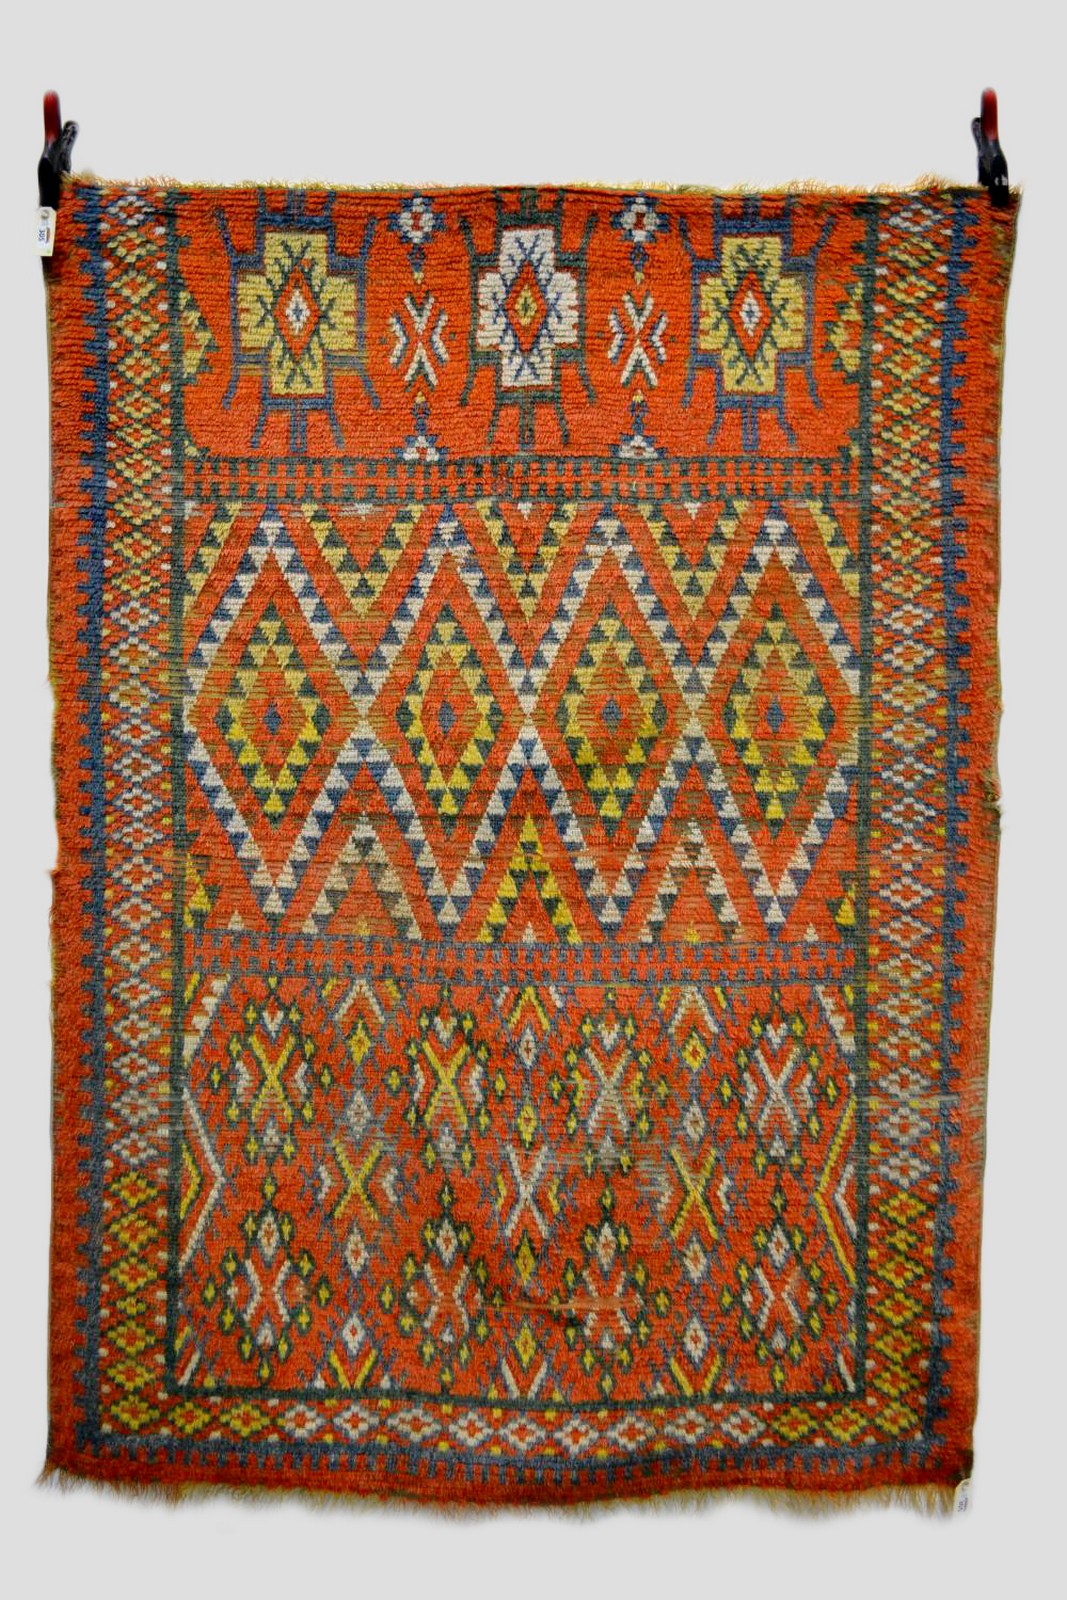 Fragmented Moroccan rug, probably Ait Ouaouzguite, High Atlas, 20th century, 6ft. 1in. x 4ft. 6in.